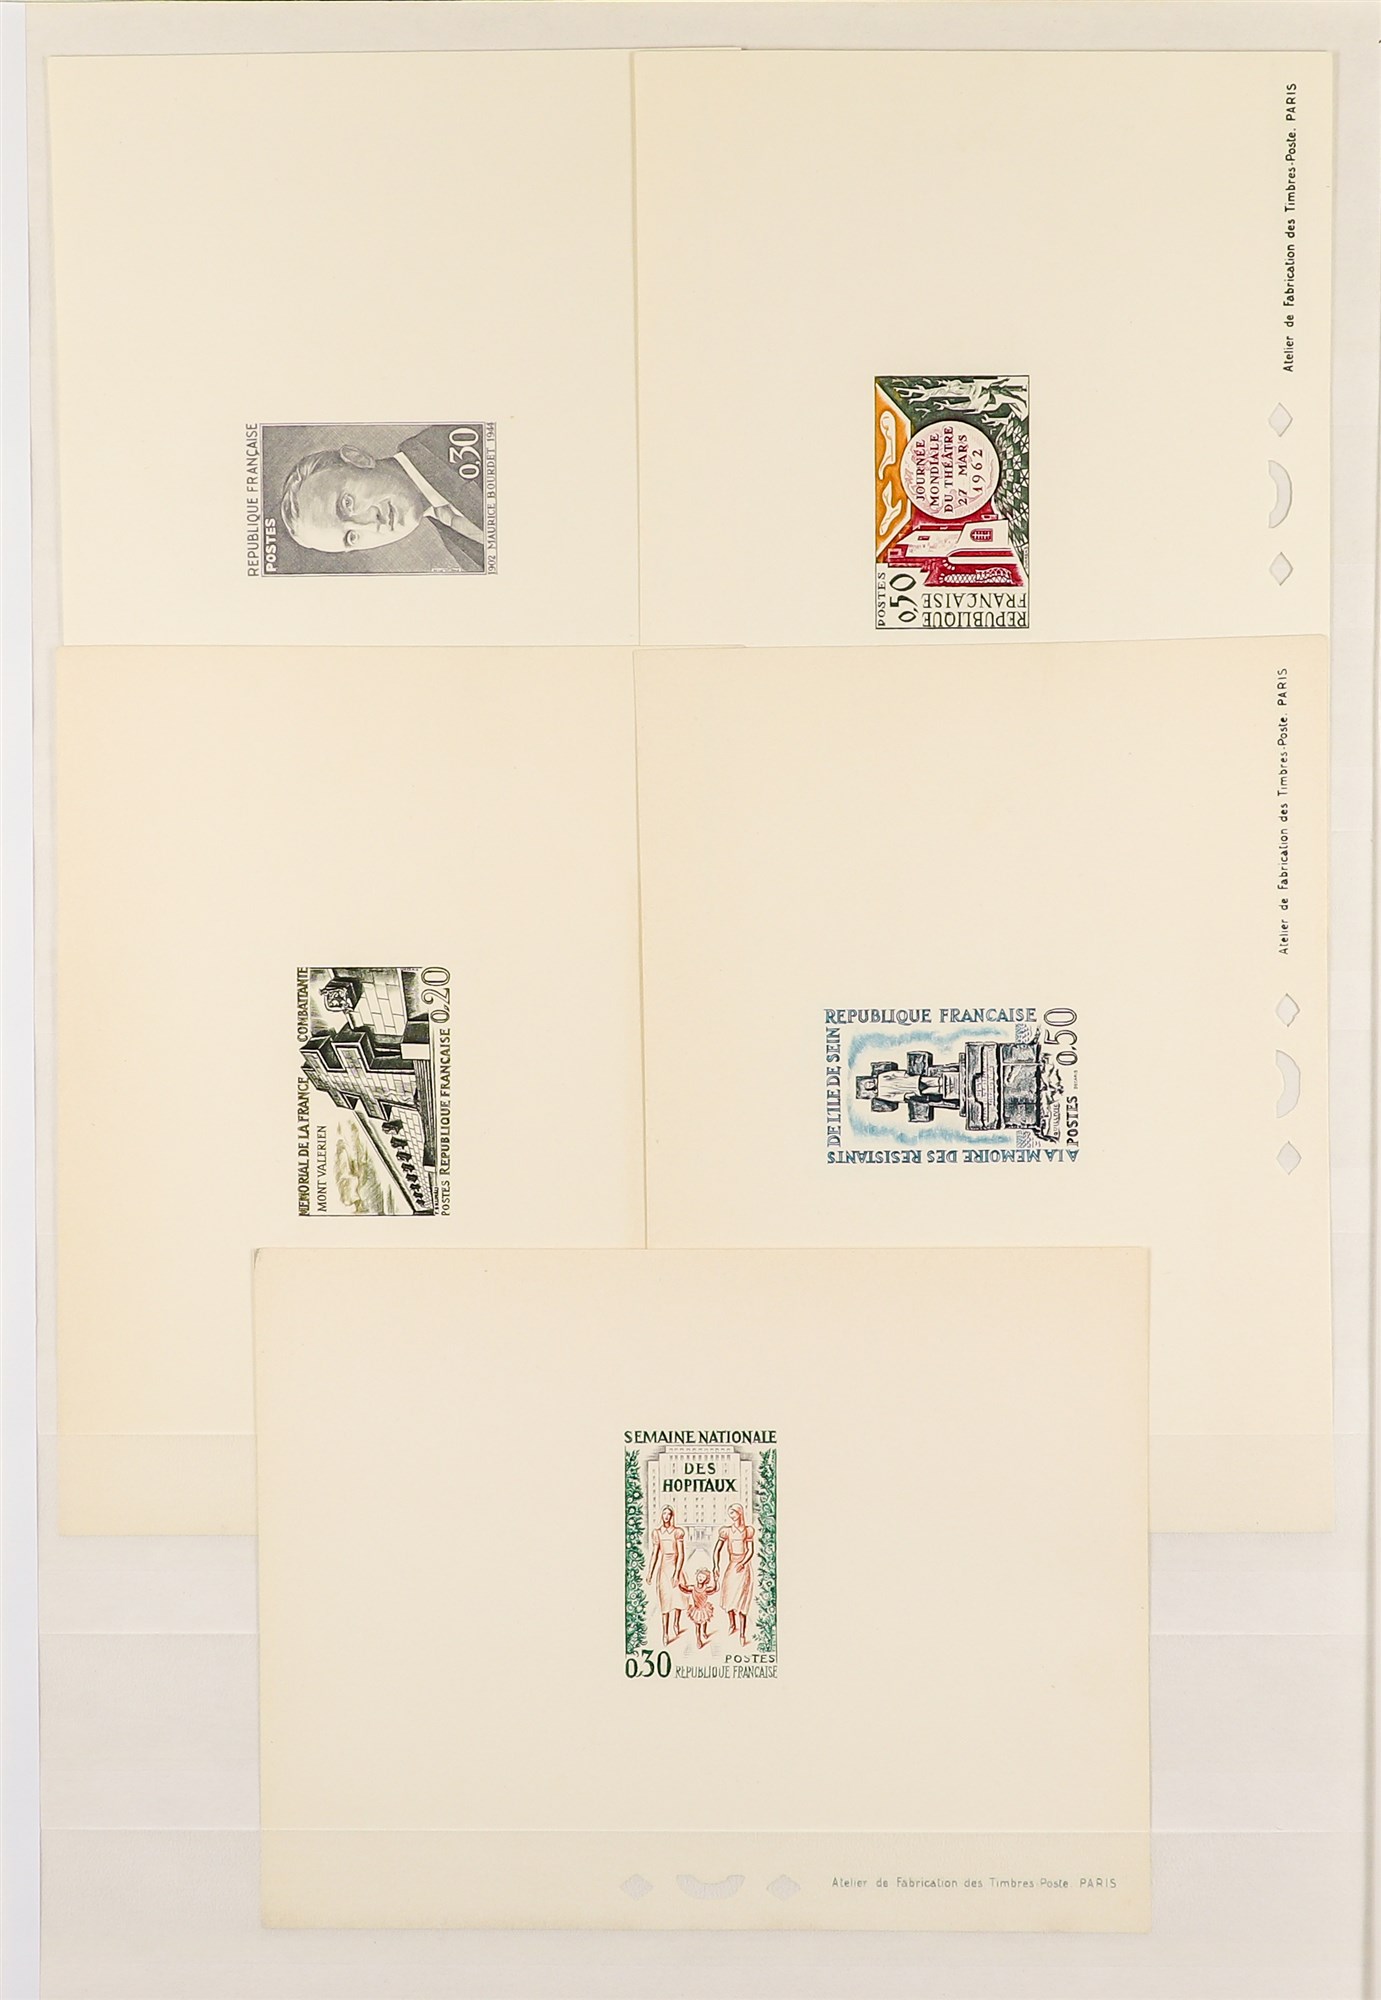 FRANCE 1960 - 1963 EPREUVES DE LUXE collection of 48 items incl 1960 Annexation of Nice and Savoy - Image 8 of 10